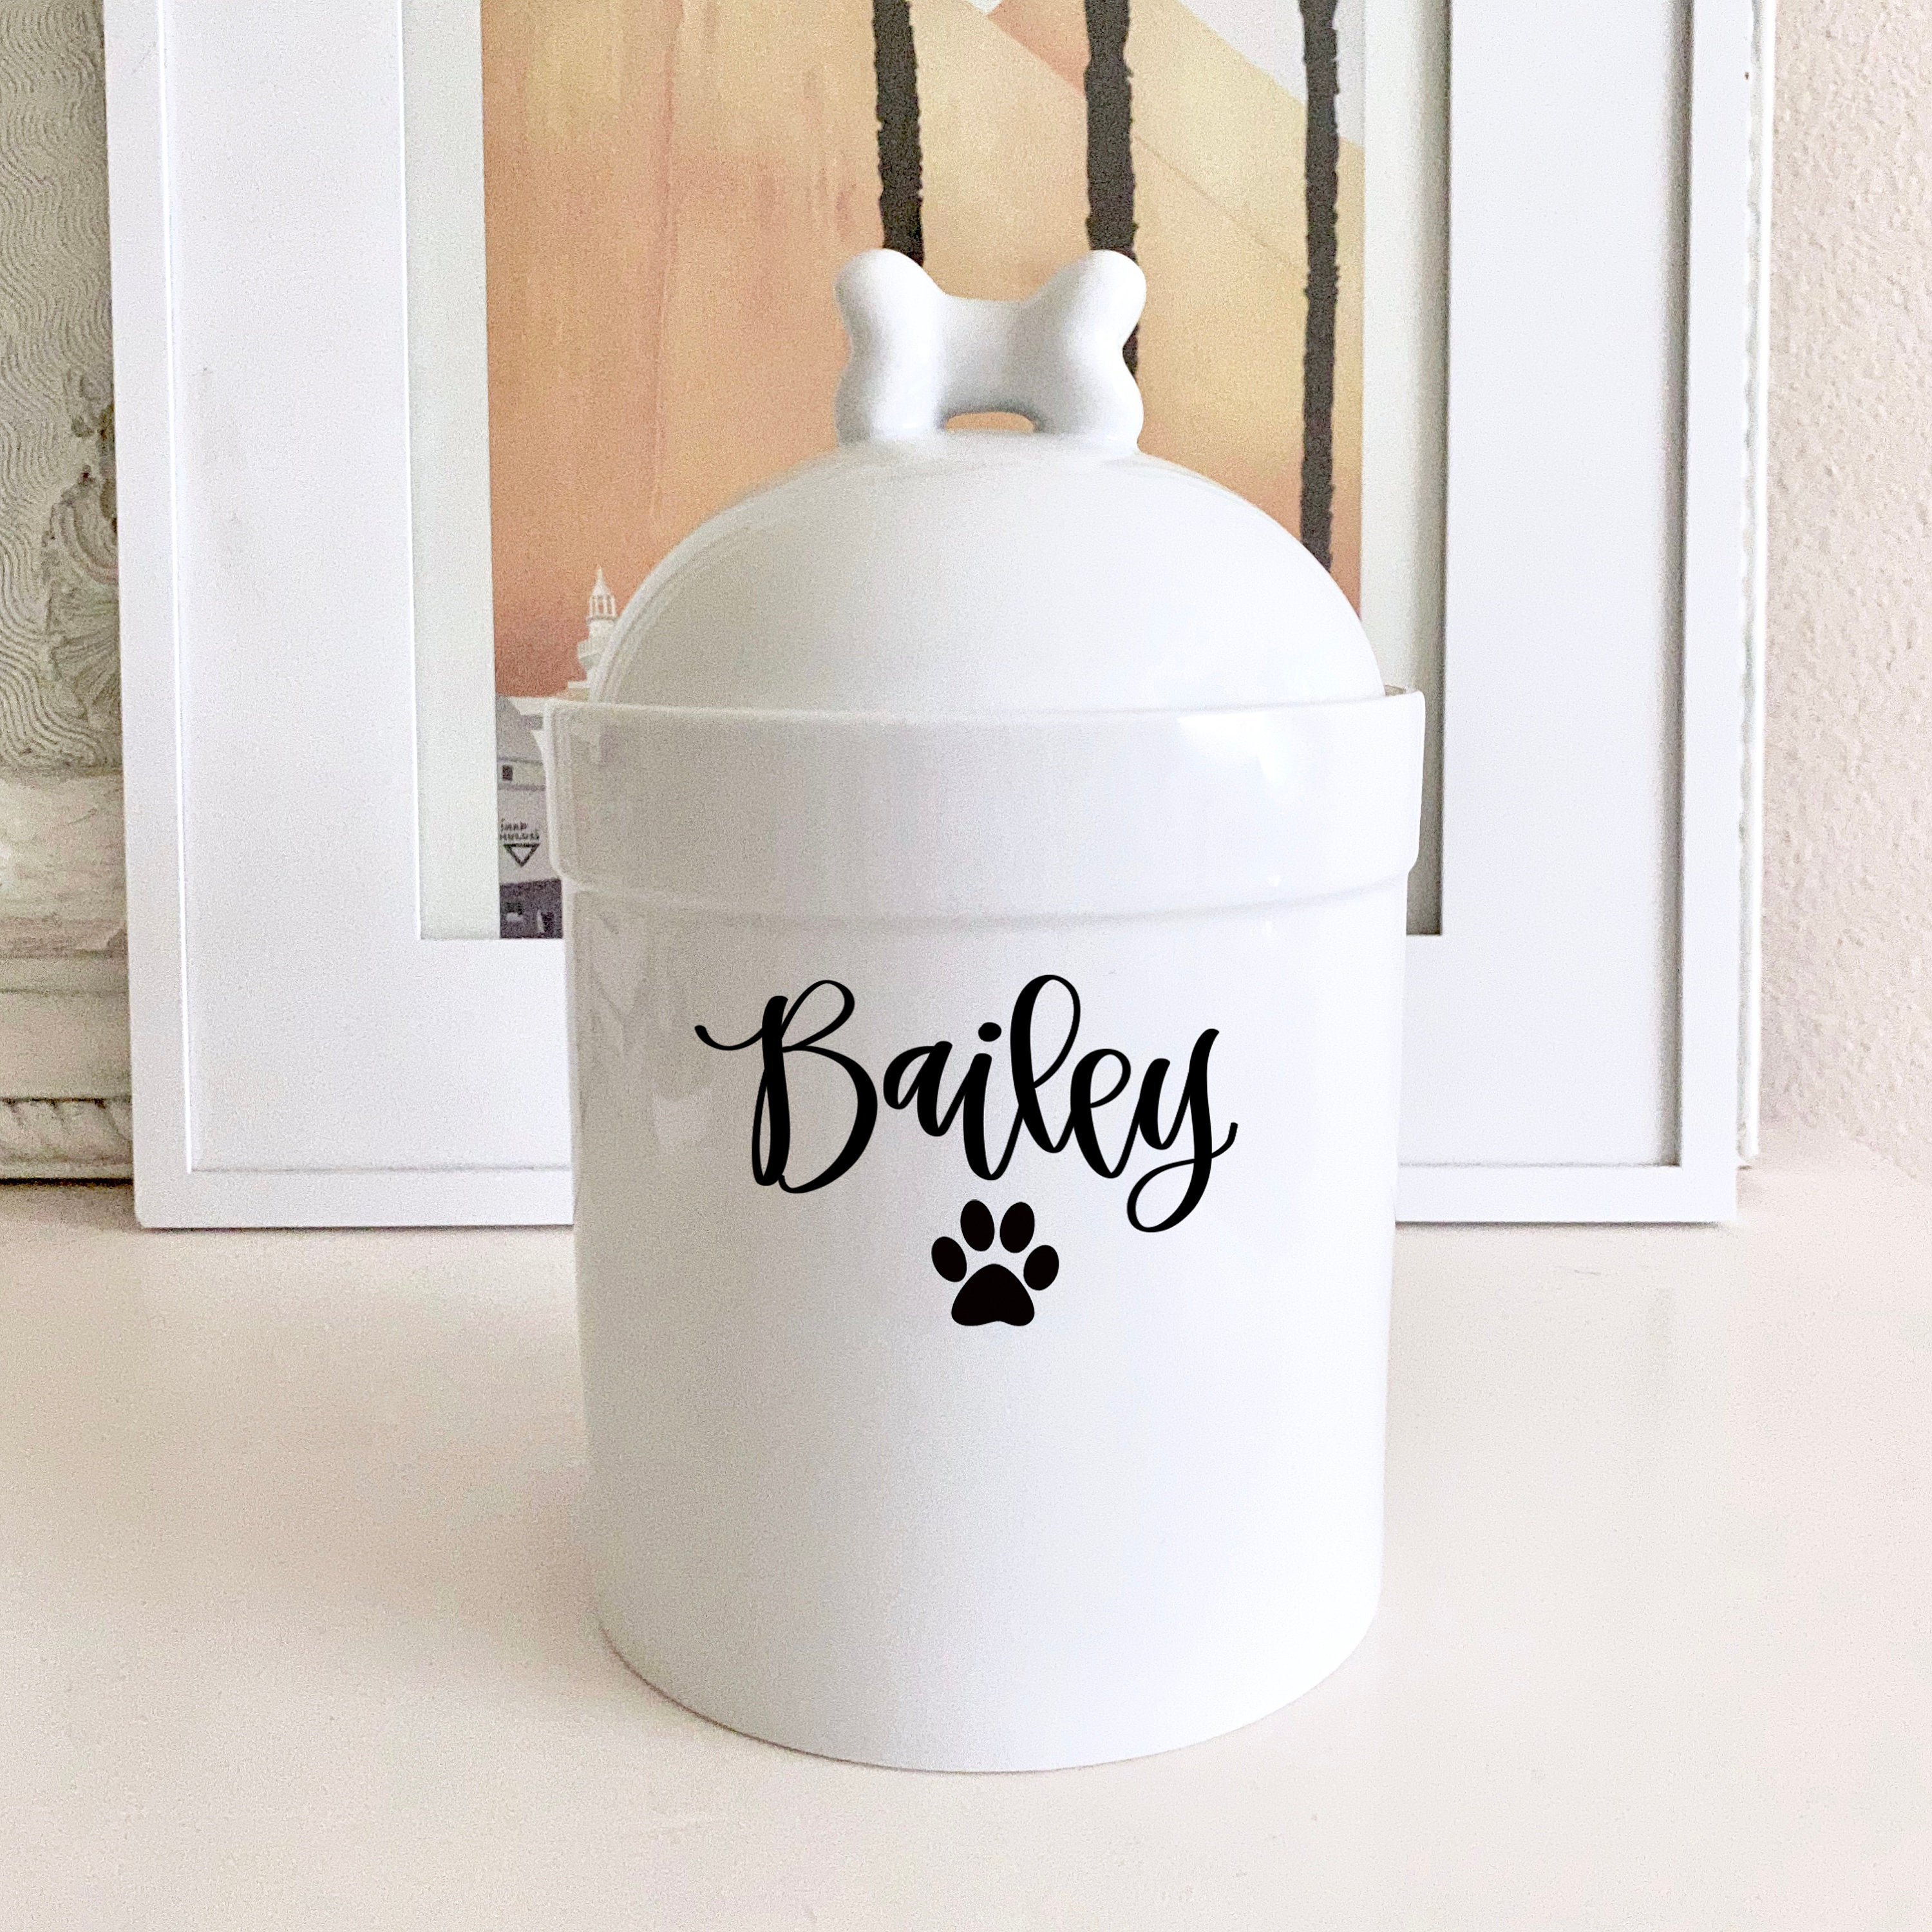 Pucci Pet Apparel Personalized Dog Treat Jar and Canister with Name 7.75 H x 4.75 D White Dog Bone Lid Porcelain 